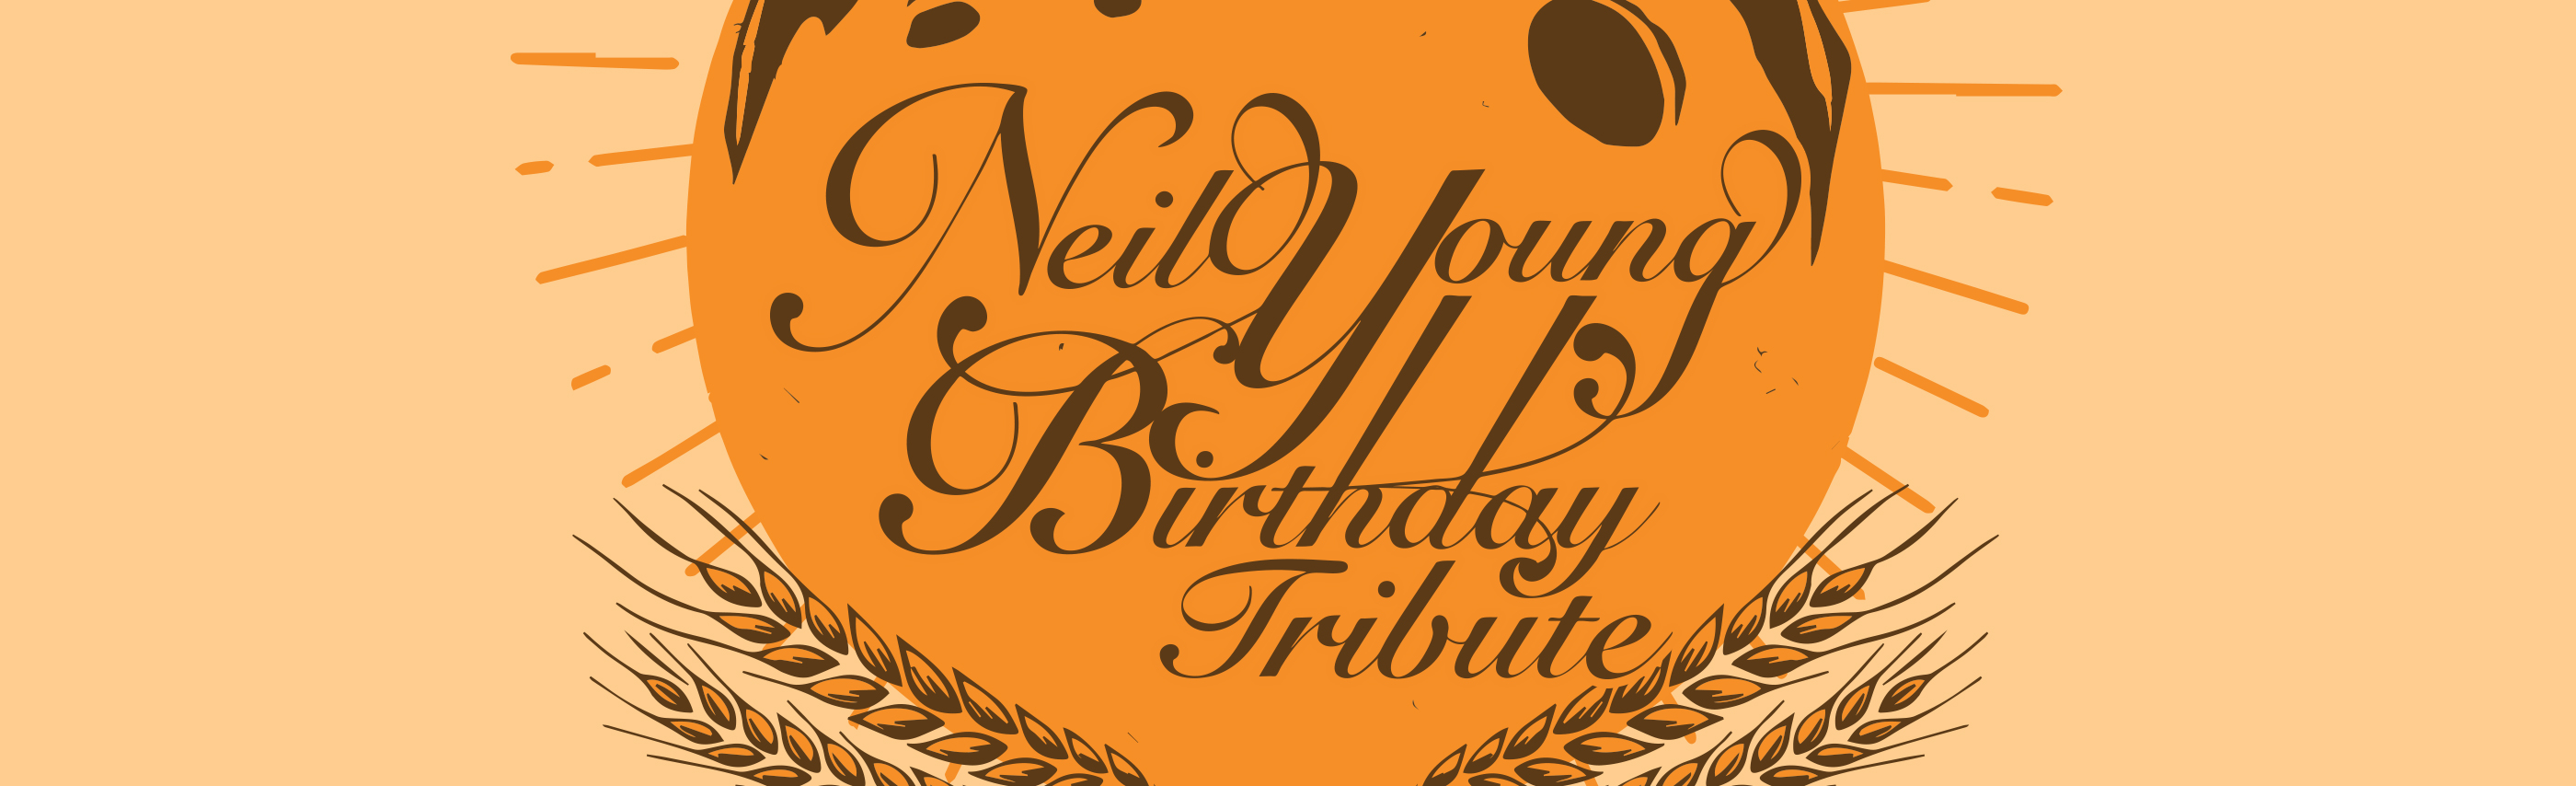 Neil Young Birthday Tribute